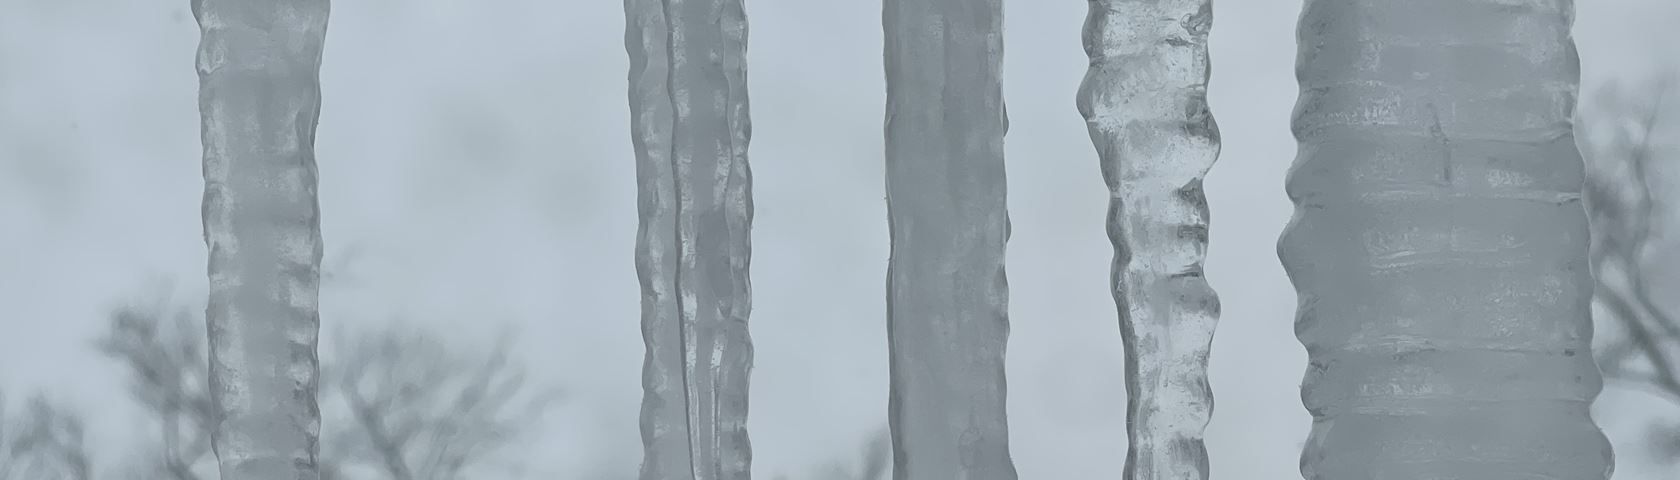 Large Icicles